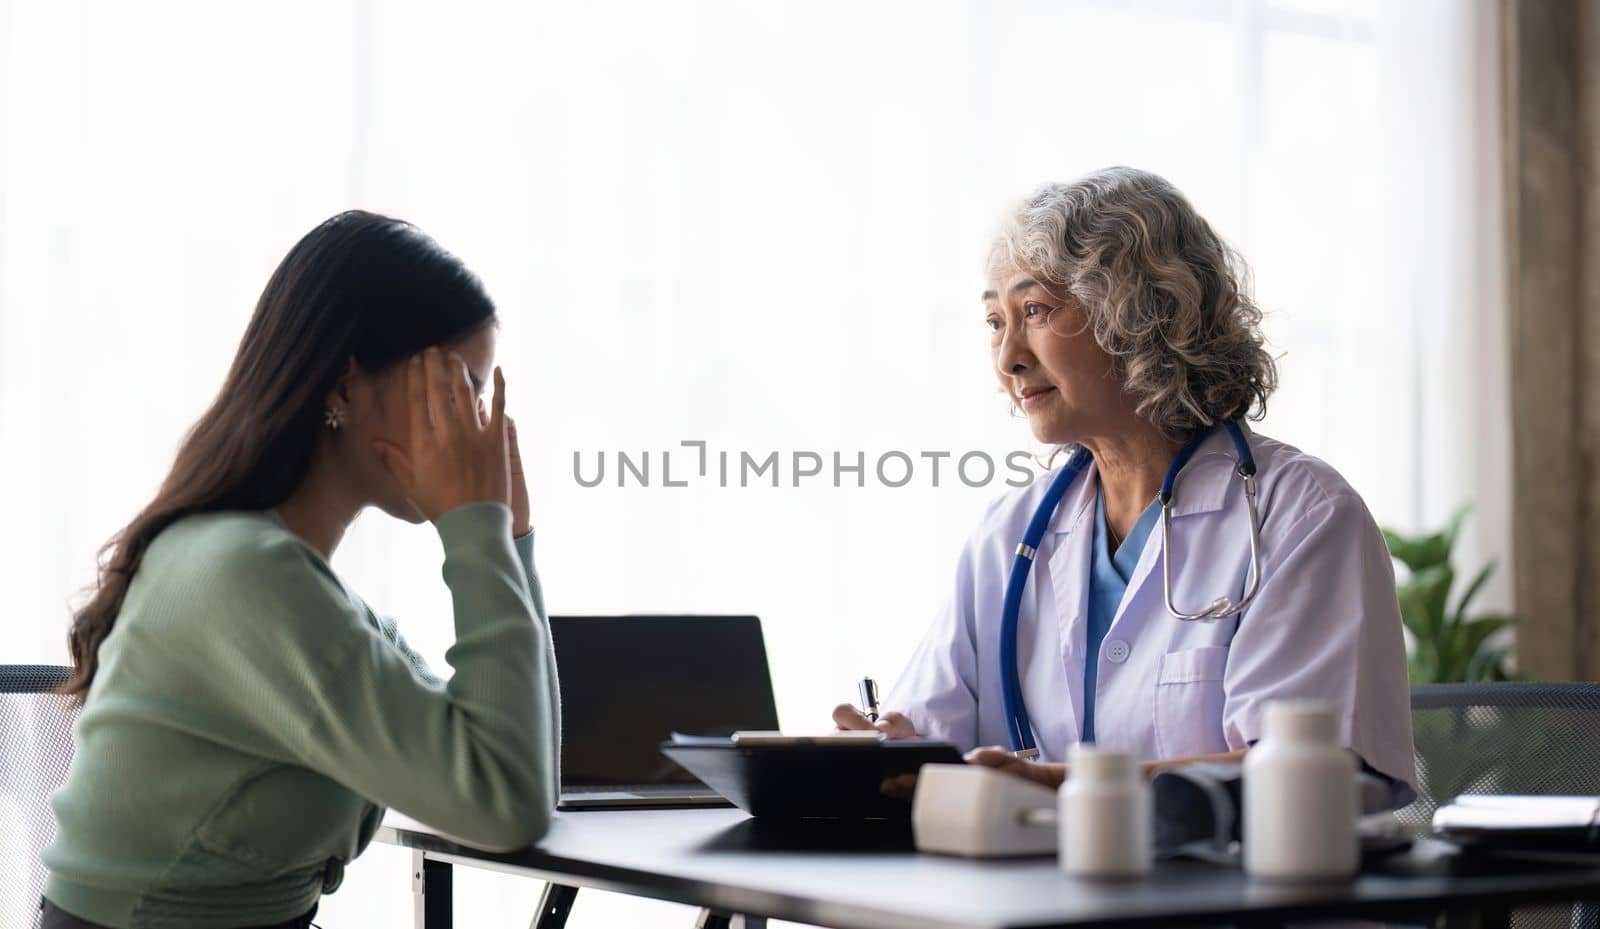 Woman senior doctor is Reading Medical History of Female Patient and Speaking with Her During Consultation in a Health Clinic. Physician in Lab Coat Sitting Behind a Laptop in Hospital Office by nateemee